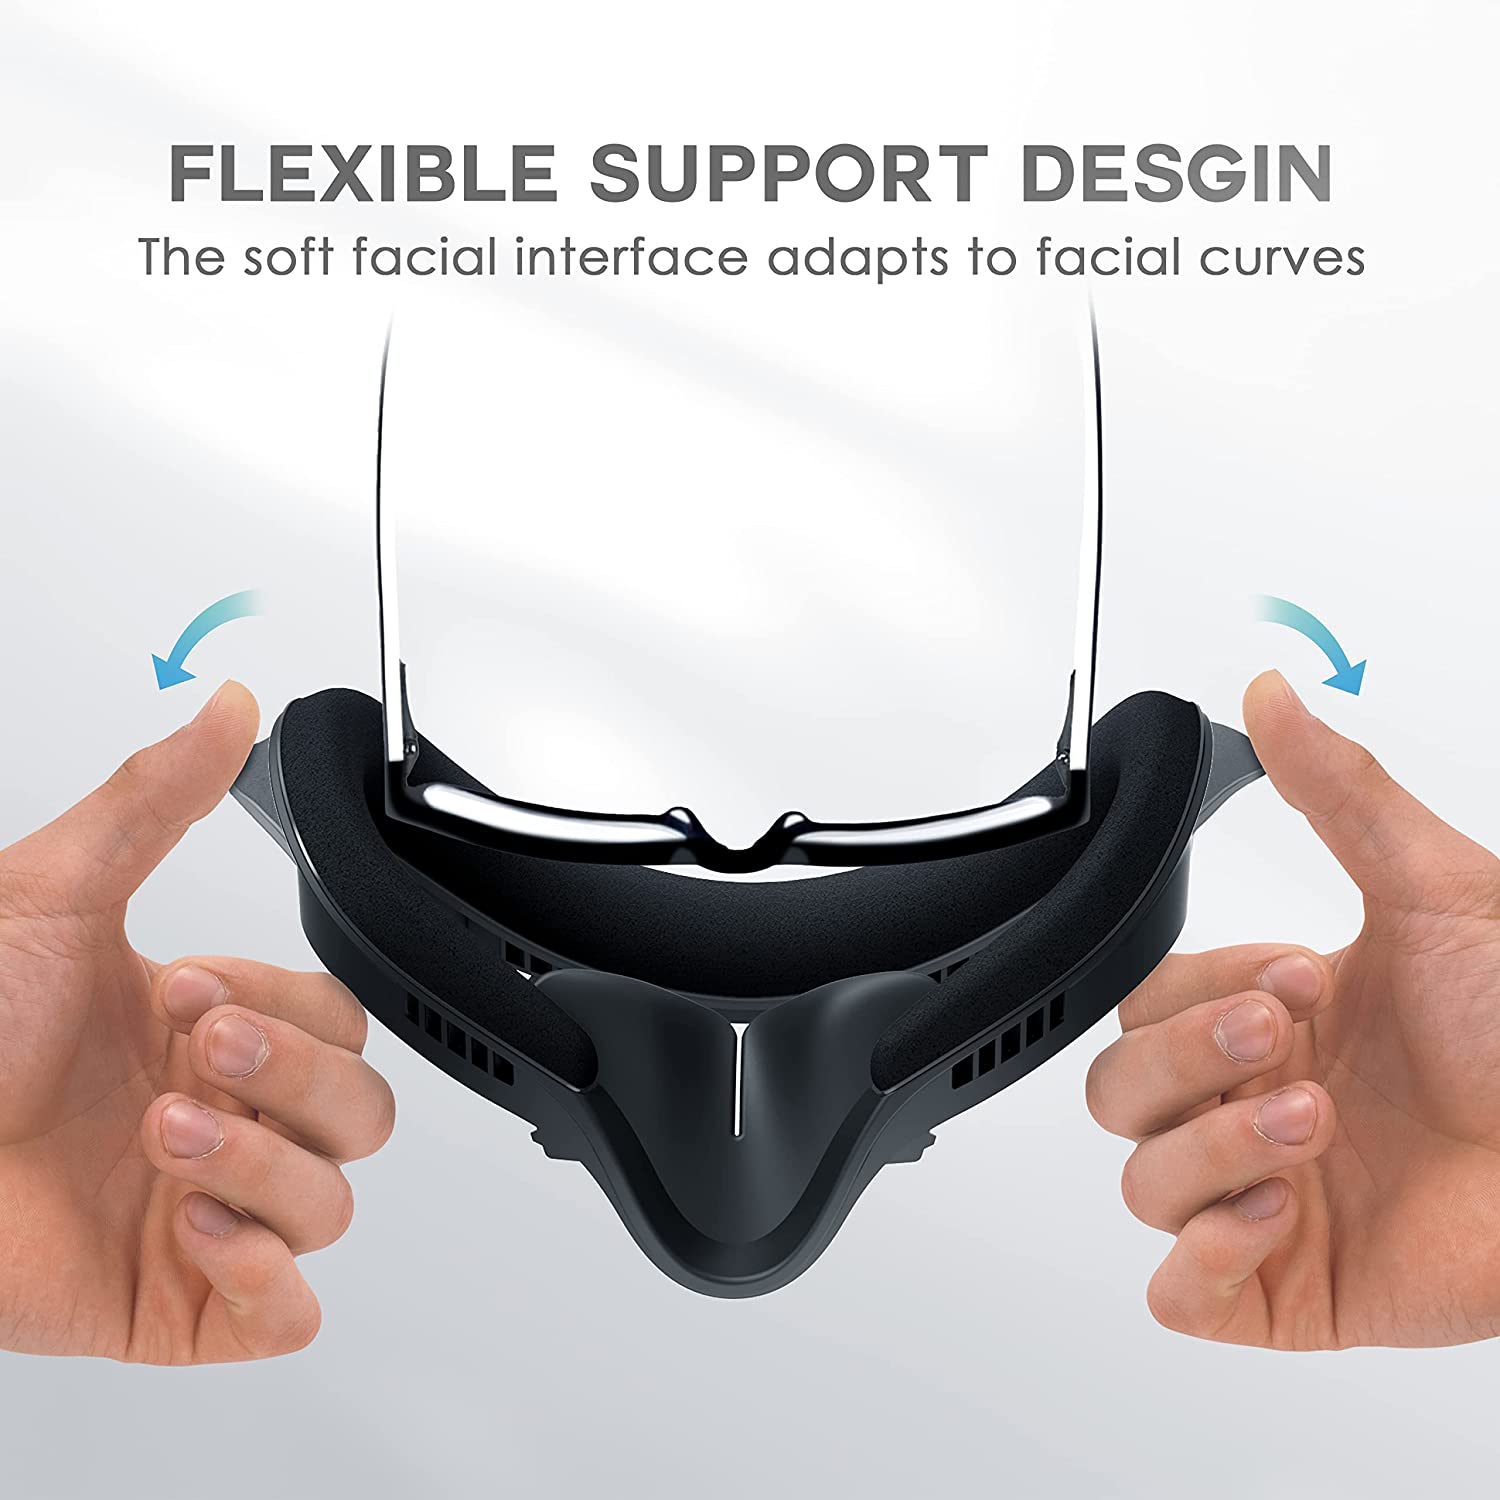 BOBOVR F2 Fitness Facial Interface (Upgraded Version) - Compatible with Oculus/Meta Quest2, Soft PU Face Cover/Pad, Active Air Circulation Micro-Fan Ventilation to Reduce Lens Fogging